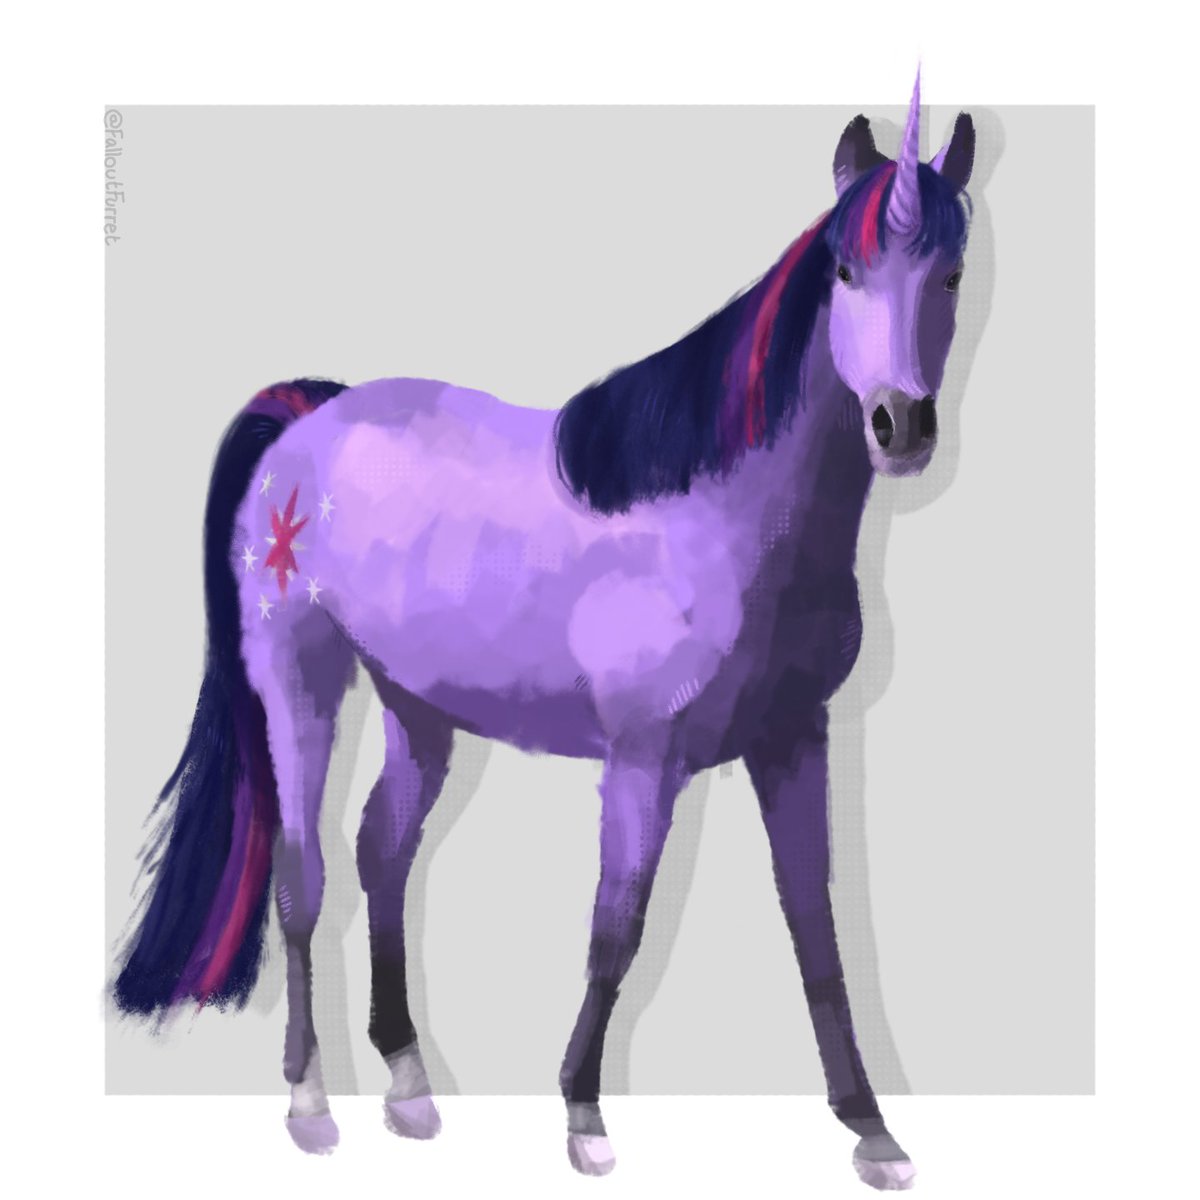 Horses are hard to draw.

#mlp #twilight #sparkle